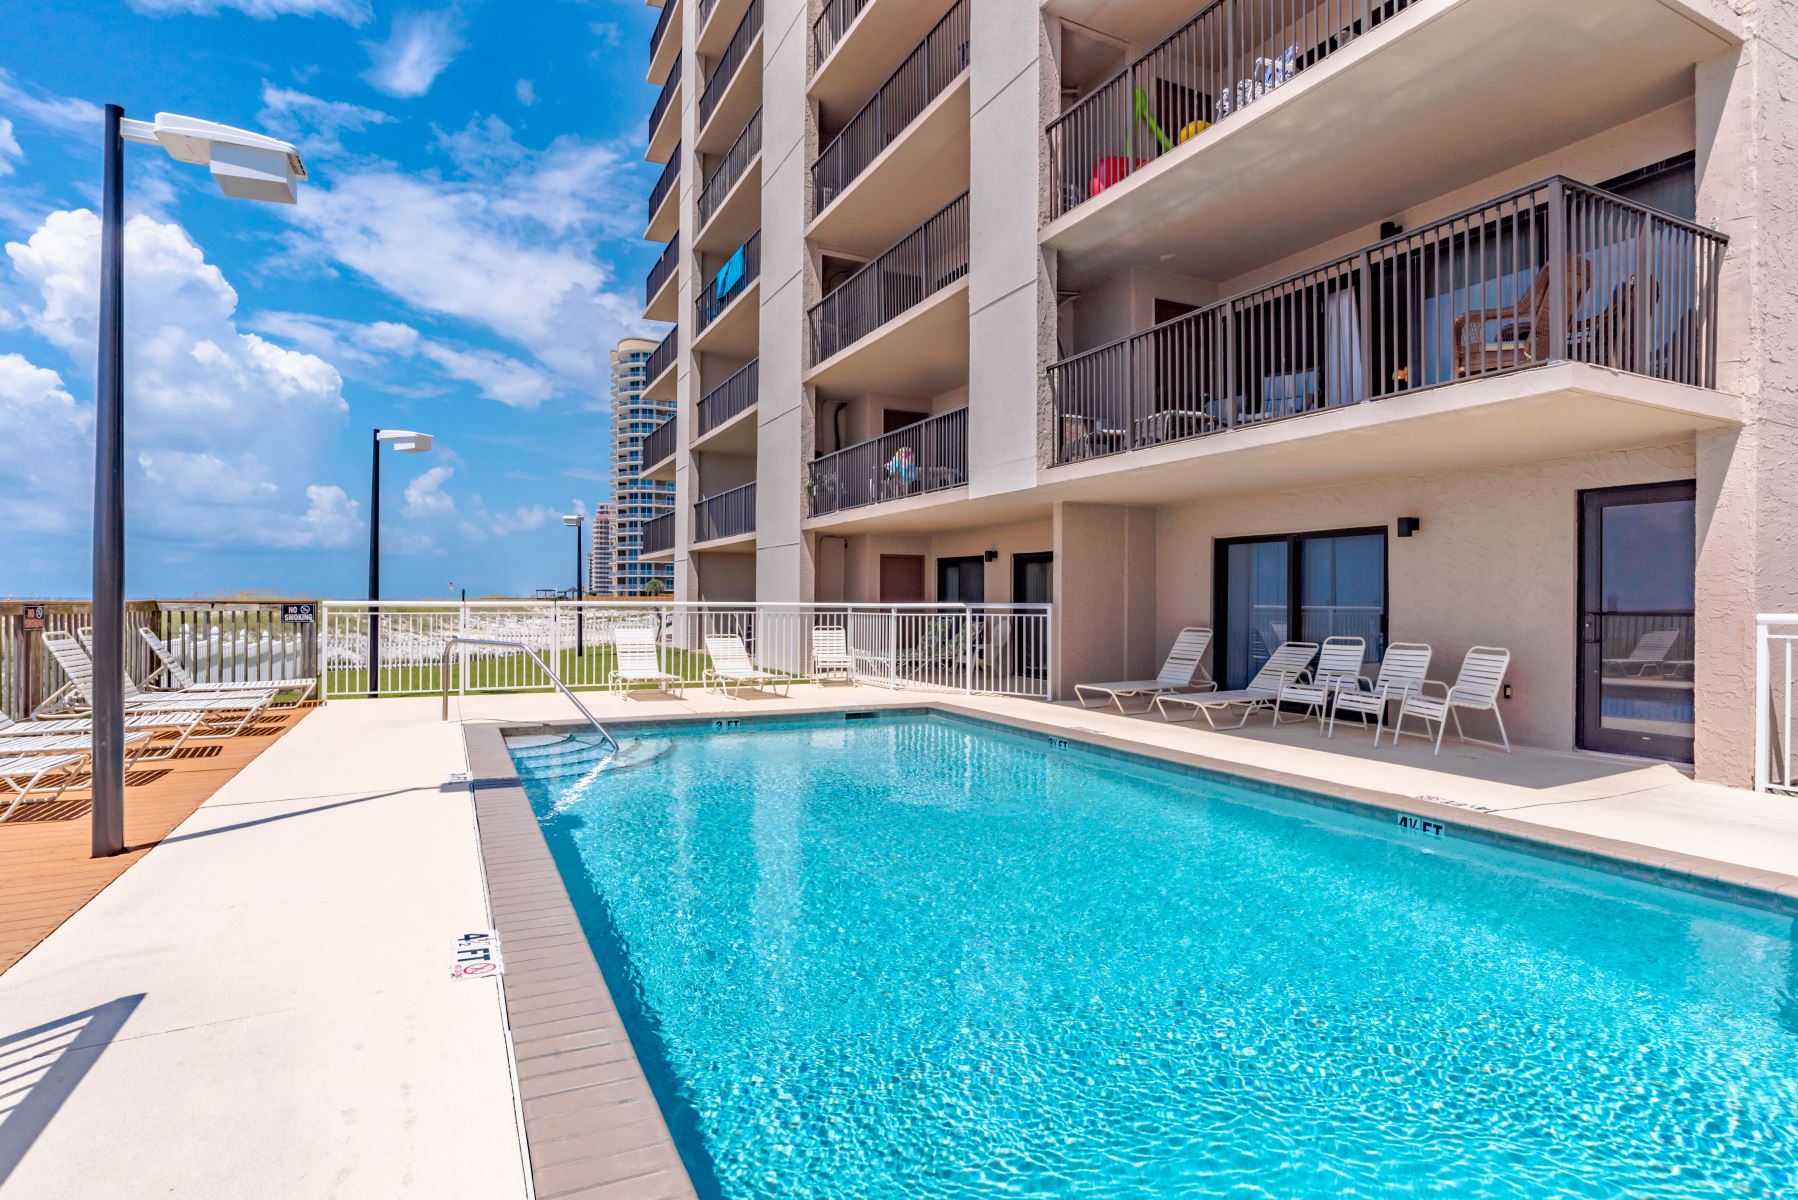 Ocean Breeze East Condos Pool Deck And Chairs